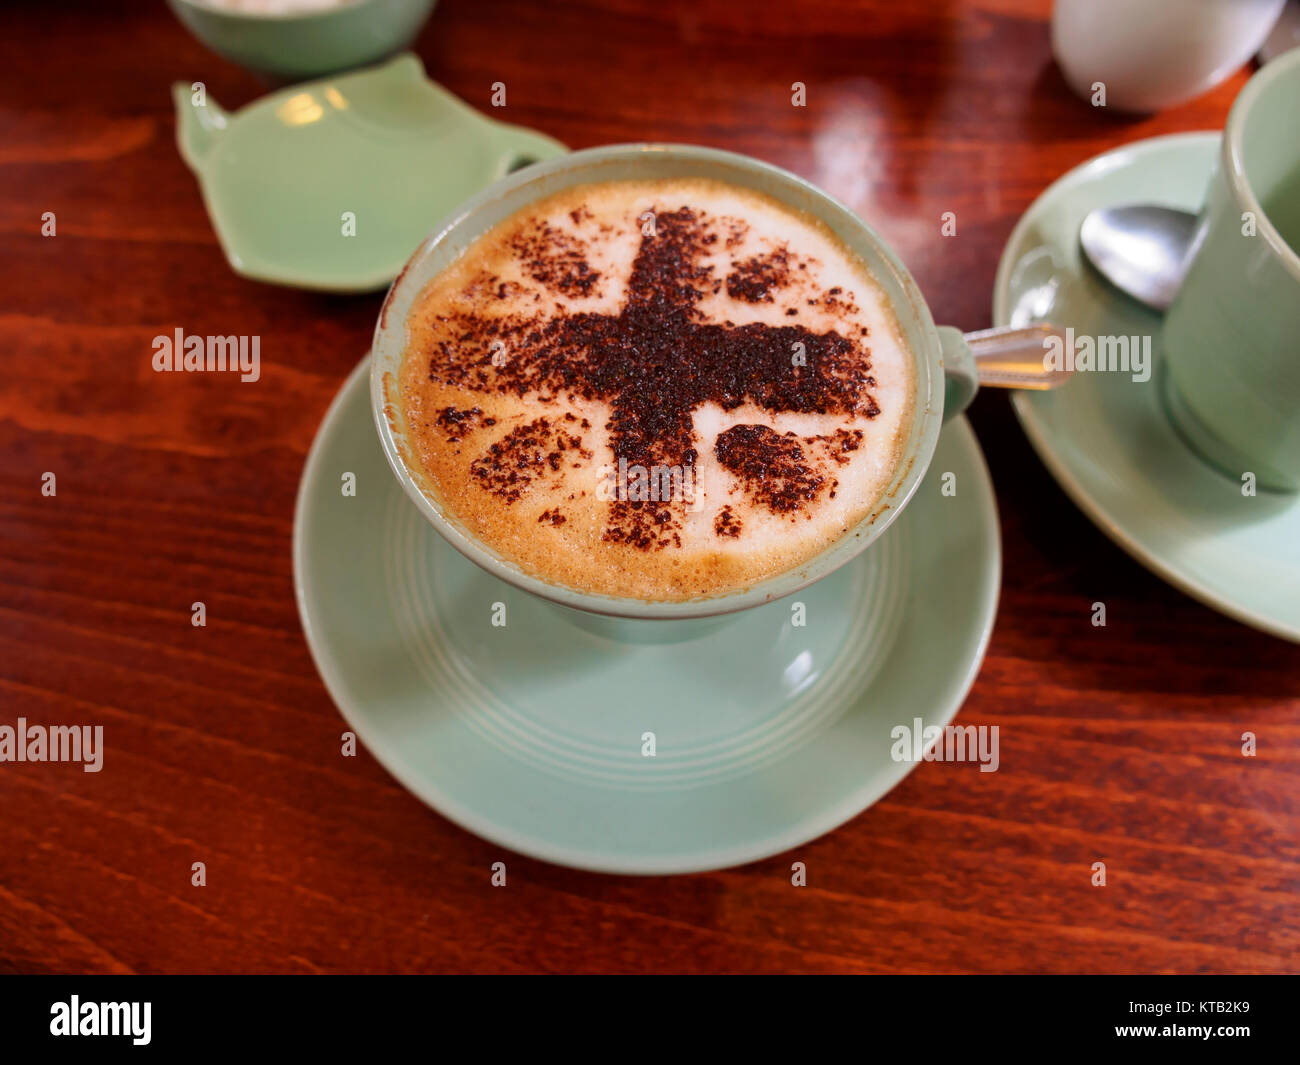 Cappuccino with a Union Jack theme Stock Photo